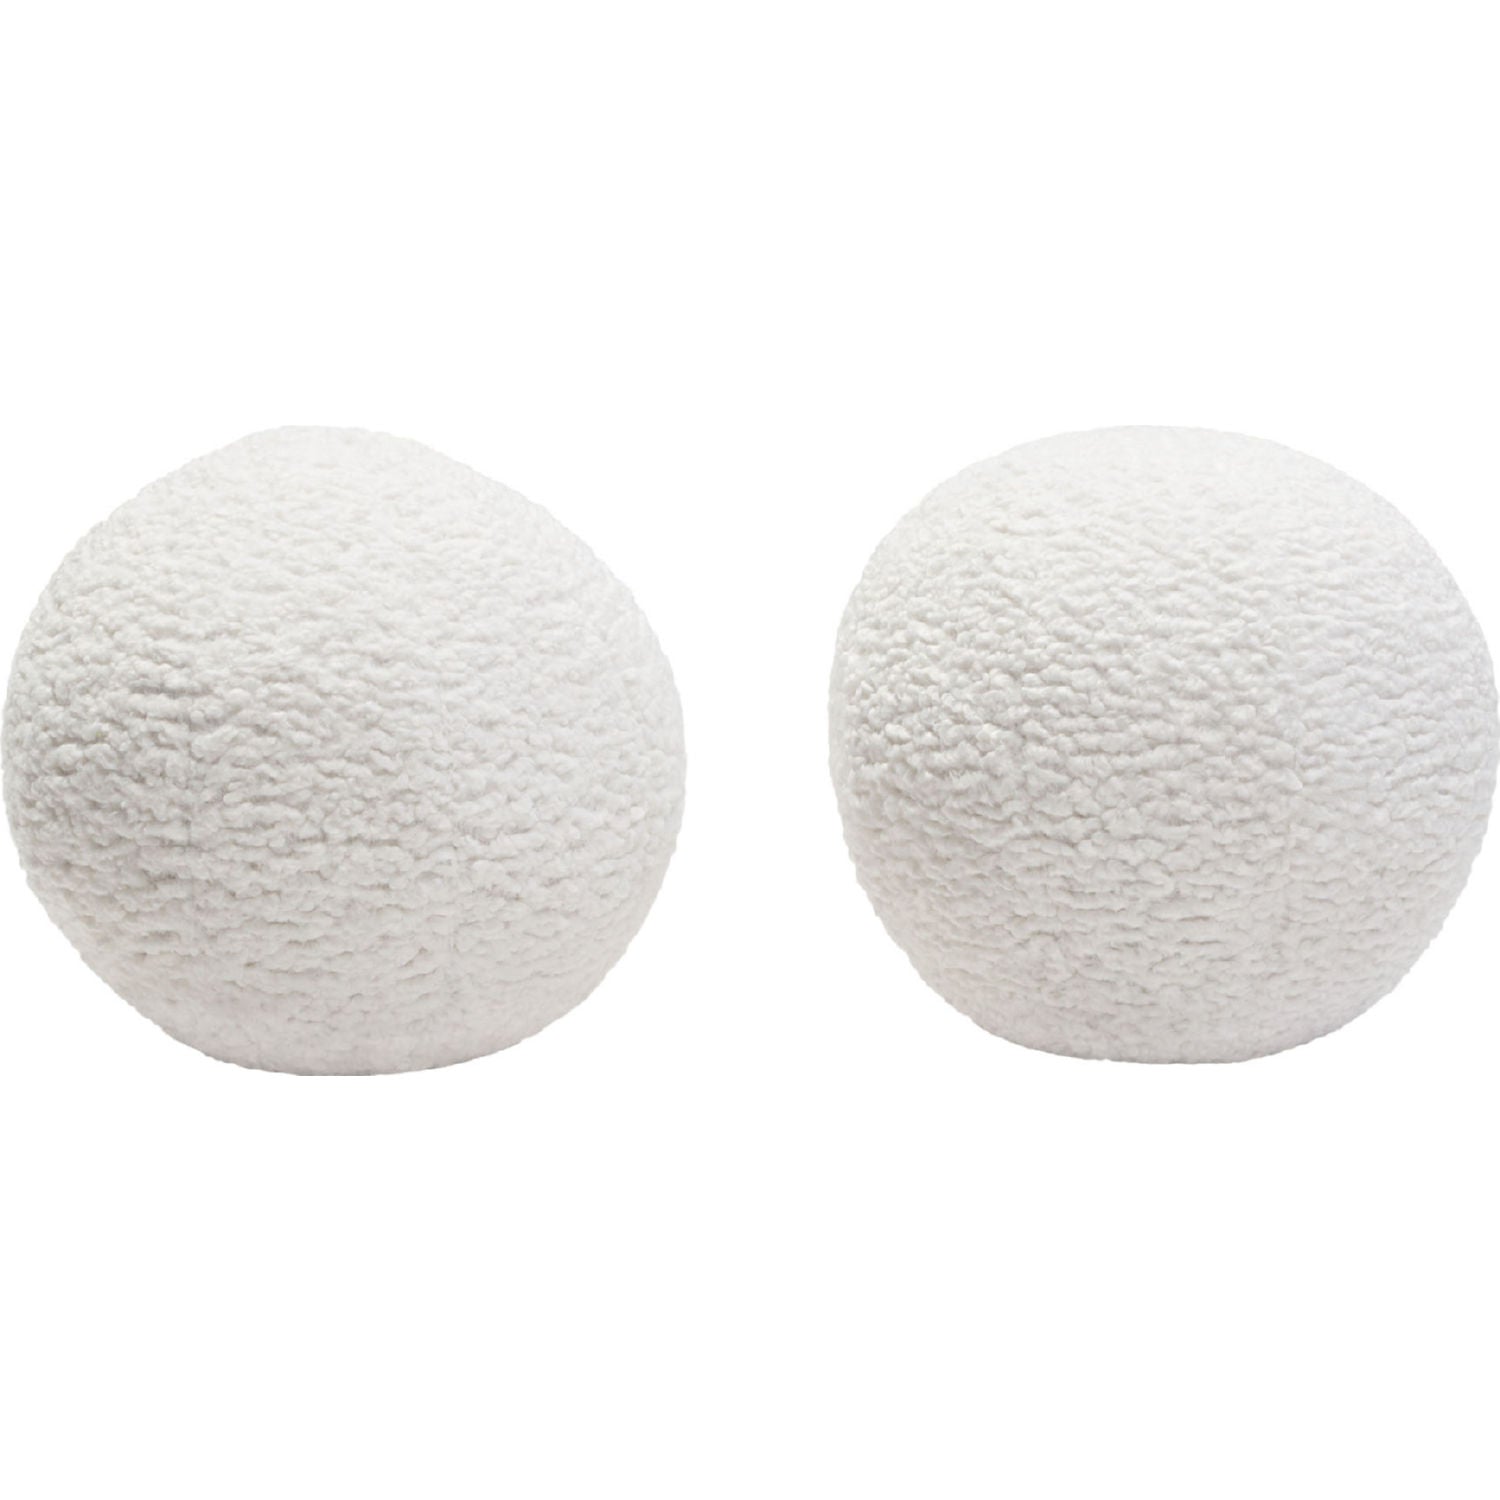 Sophisticated Round Accent Pillow - Set of 2